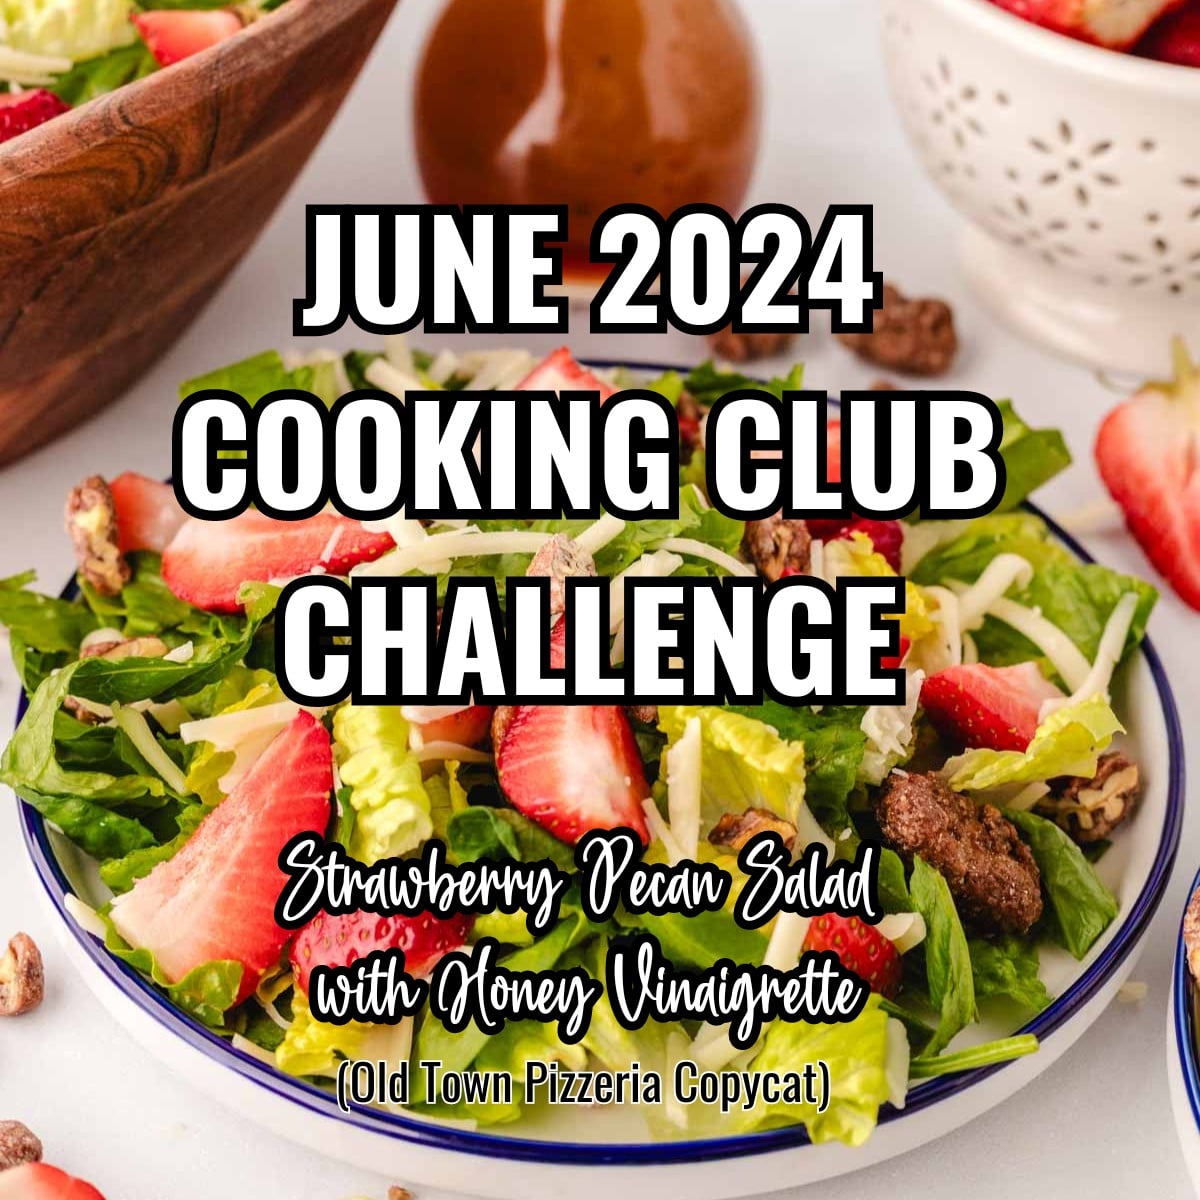 June 2024 Cooking Challenge Logo Image with a strawberry pecan salad.